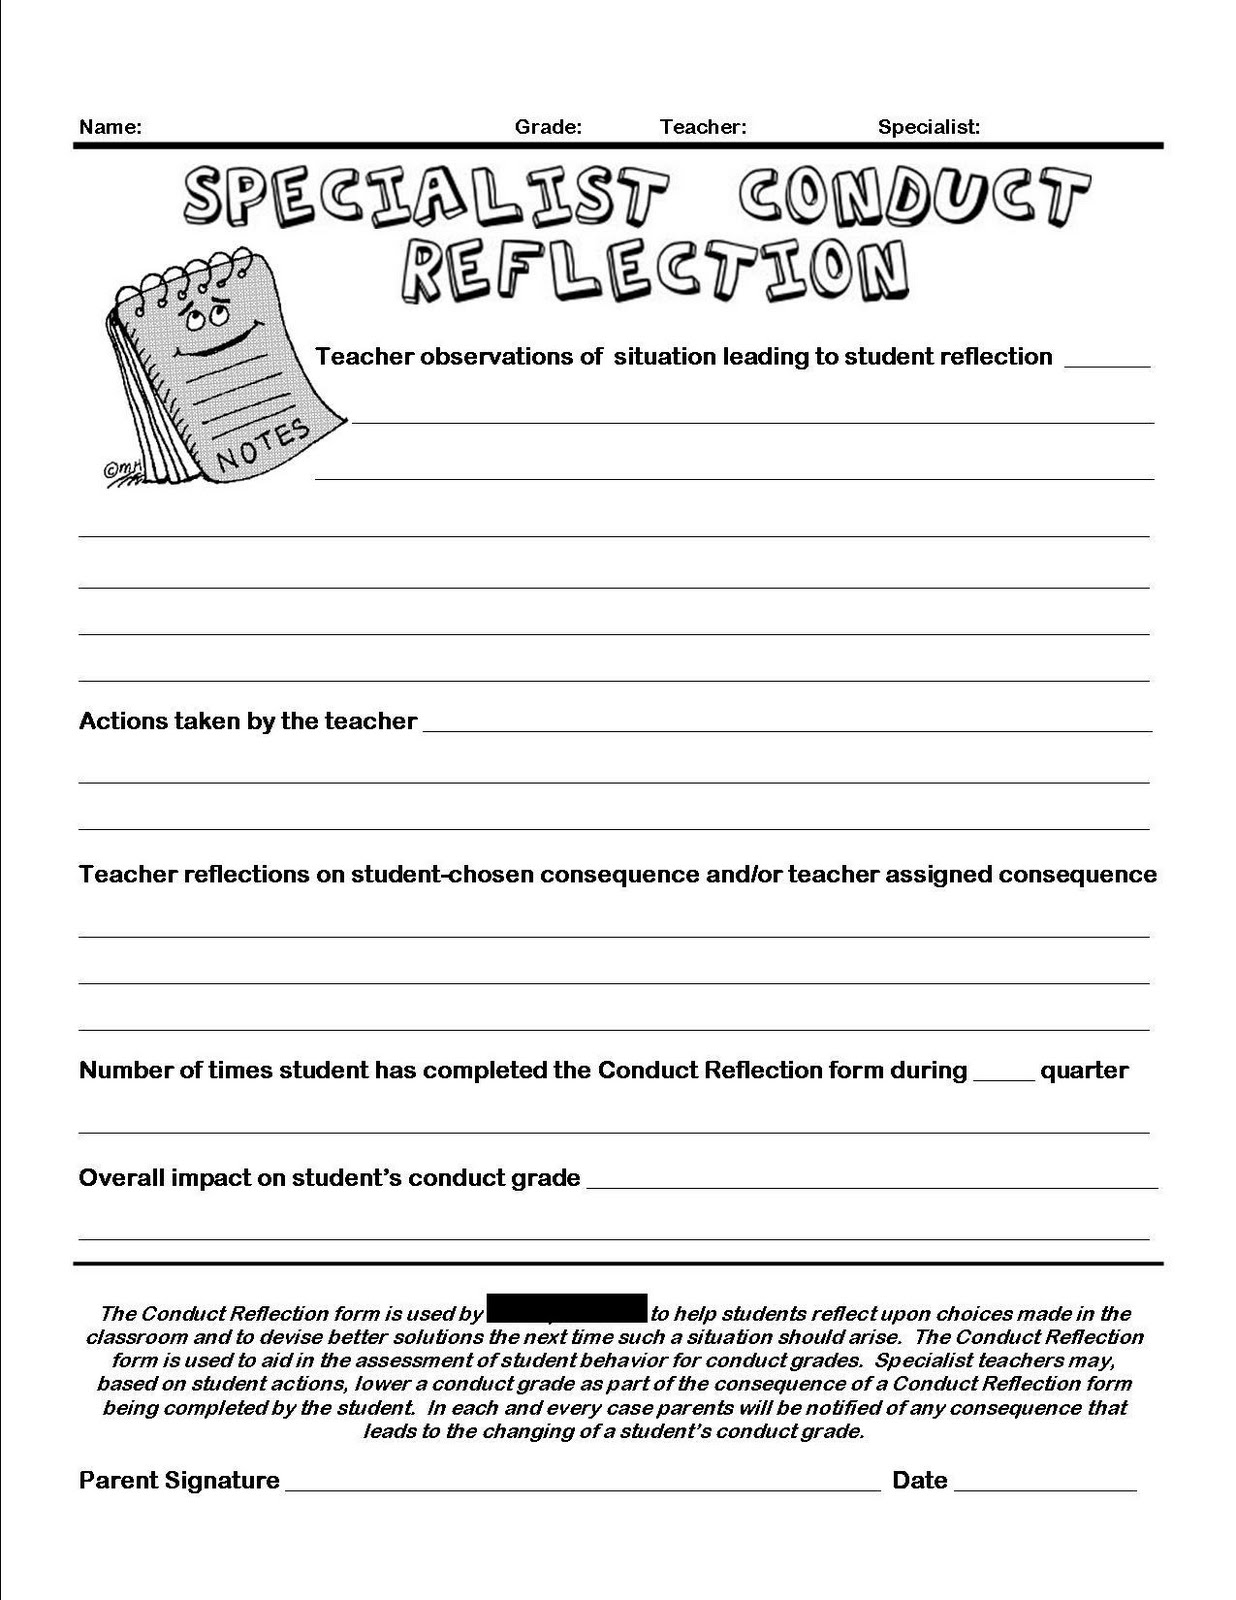 17 Best Images of Reading Reflection Worksheet 7th Grade Reading